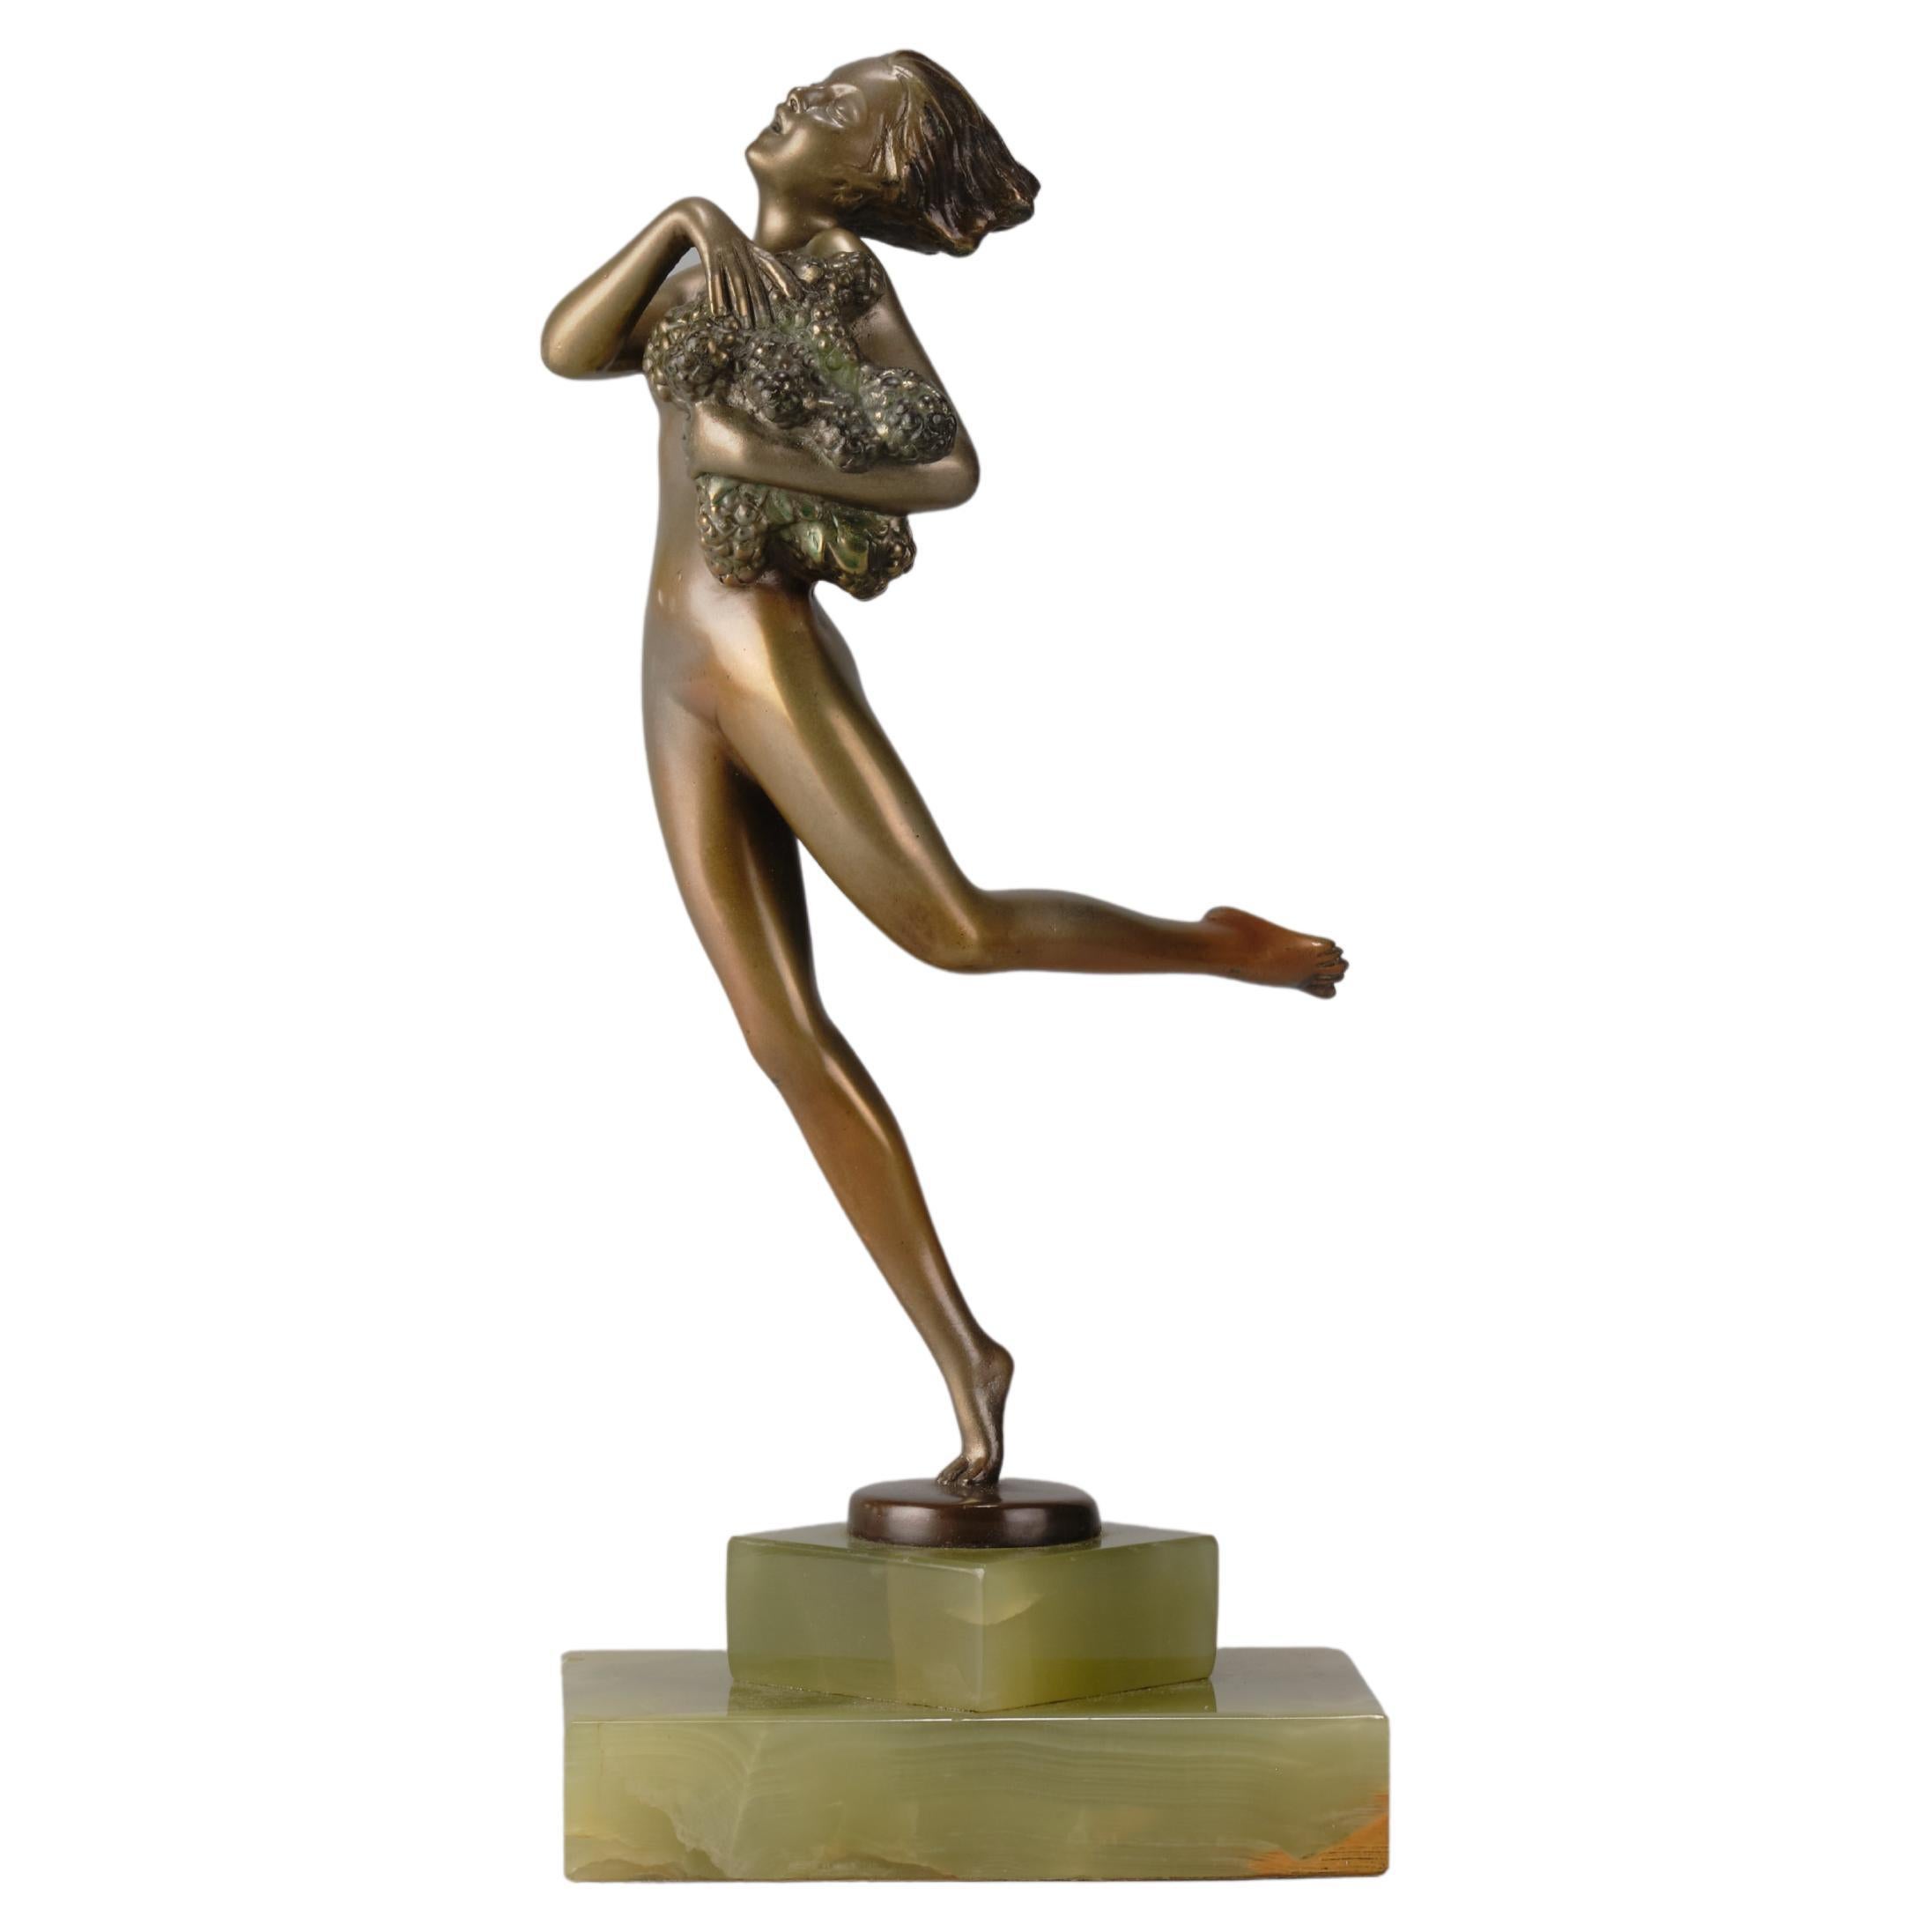 Early 20th C Austrian Cold-Painted Bronze Entitled "The Harvest" by J Lorenzl